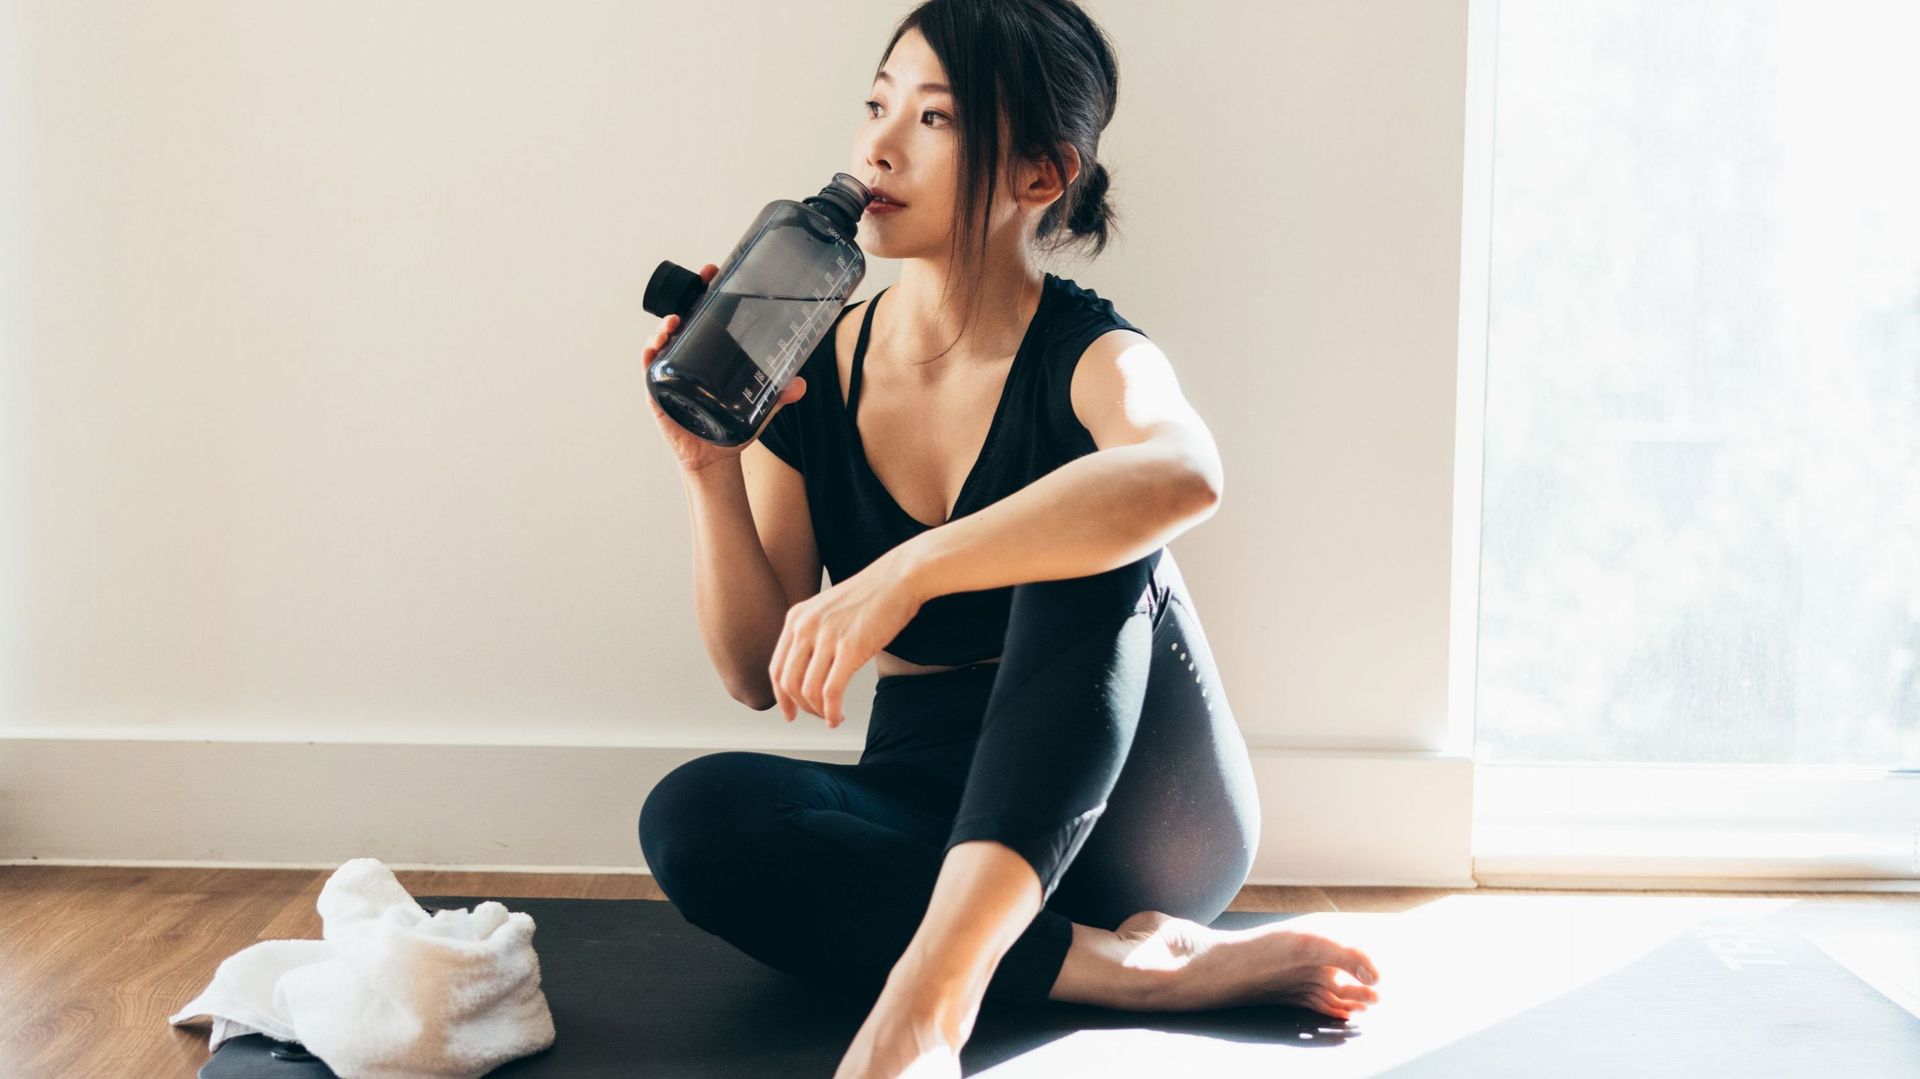 Asian woman drinking water with a water bottle, sitting on exercise mat after doing yoga